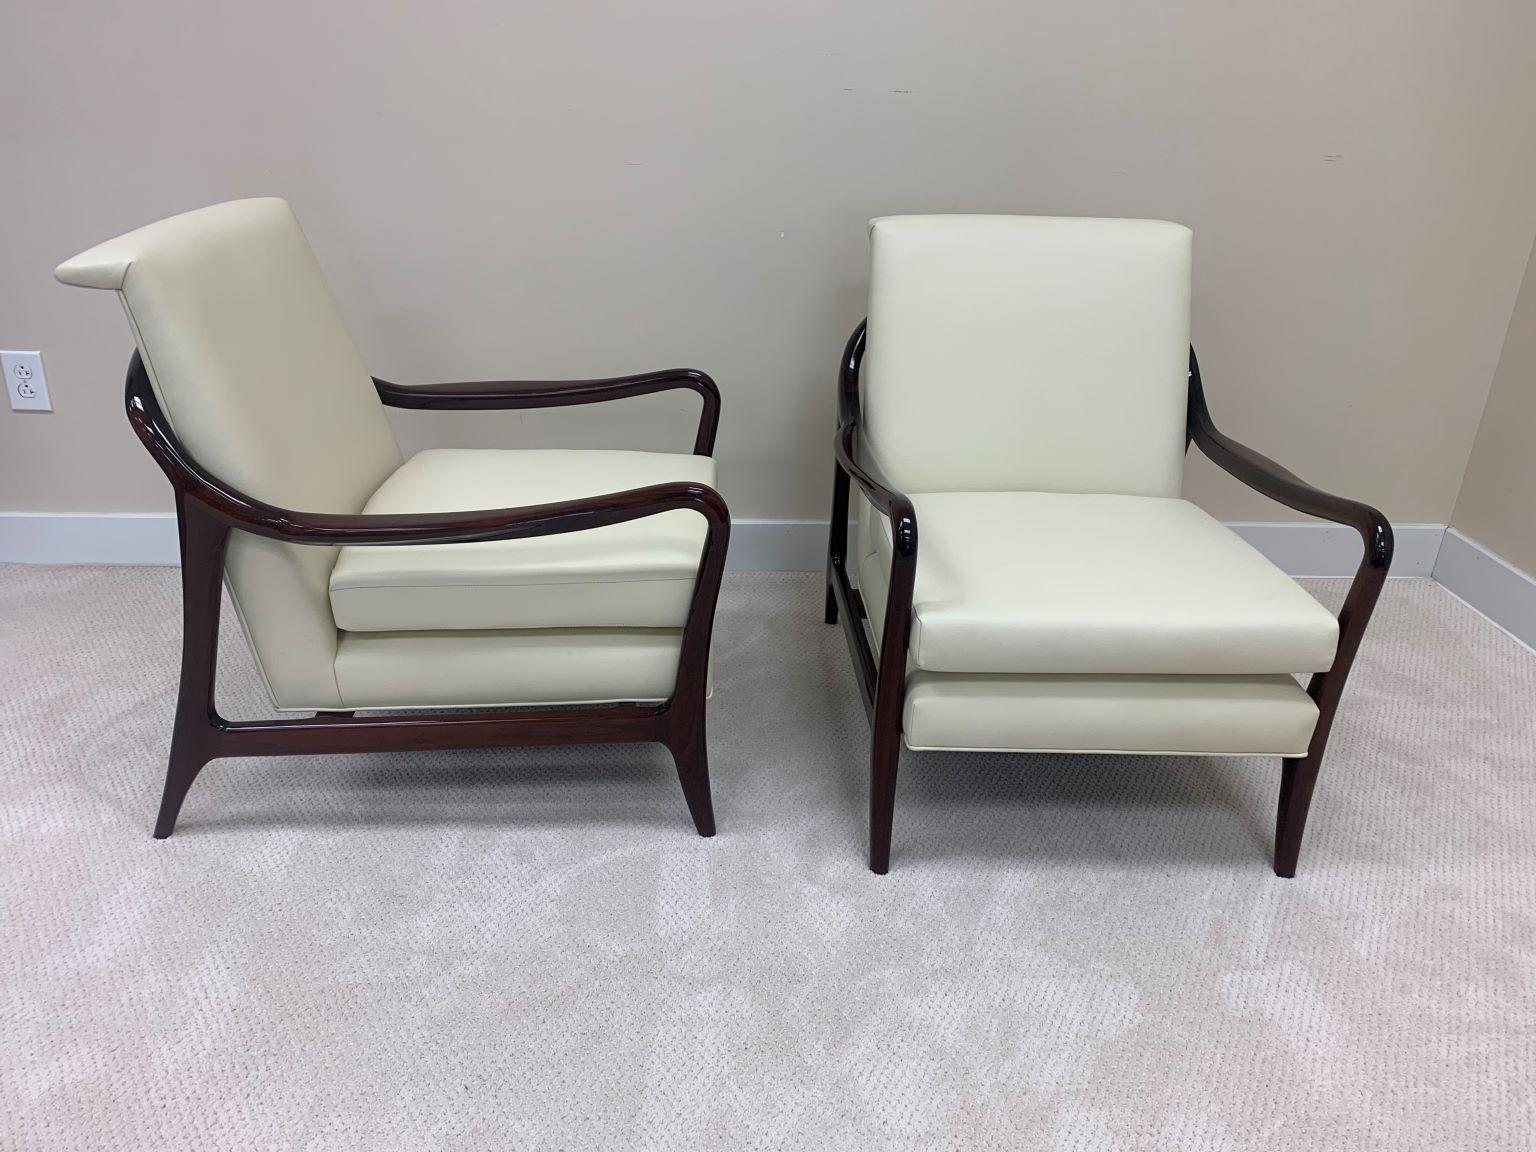 Mid-20th Century Pair of Sculptural Mid-Century Kagan Style Walnut and Leather Lounge Chairs